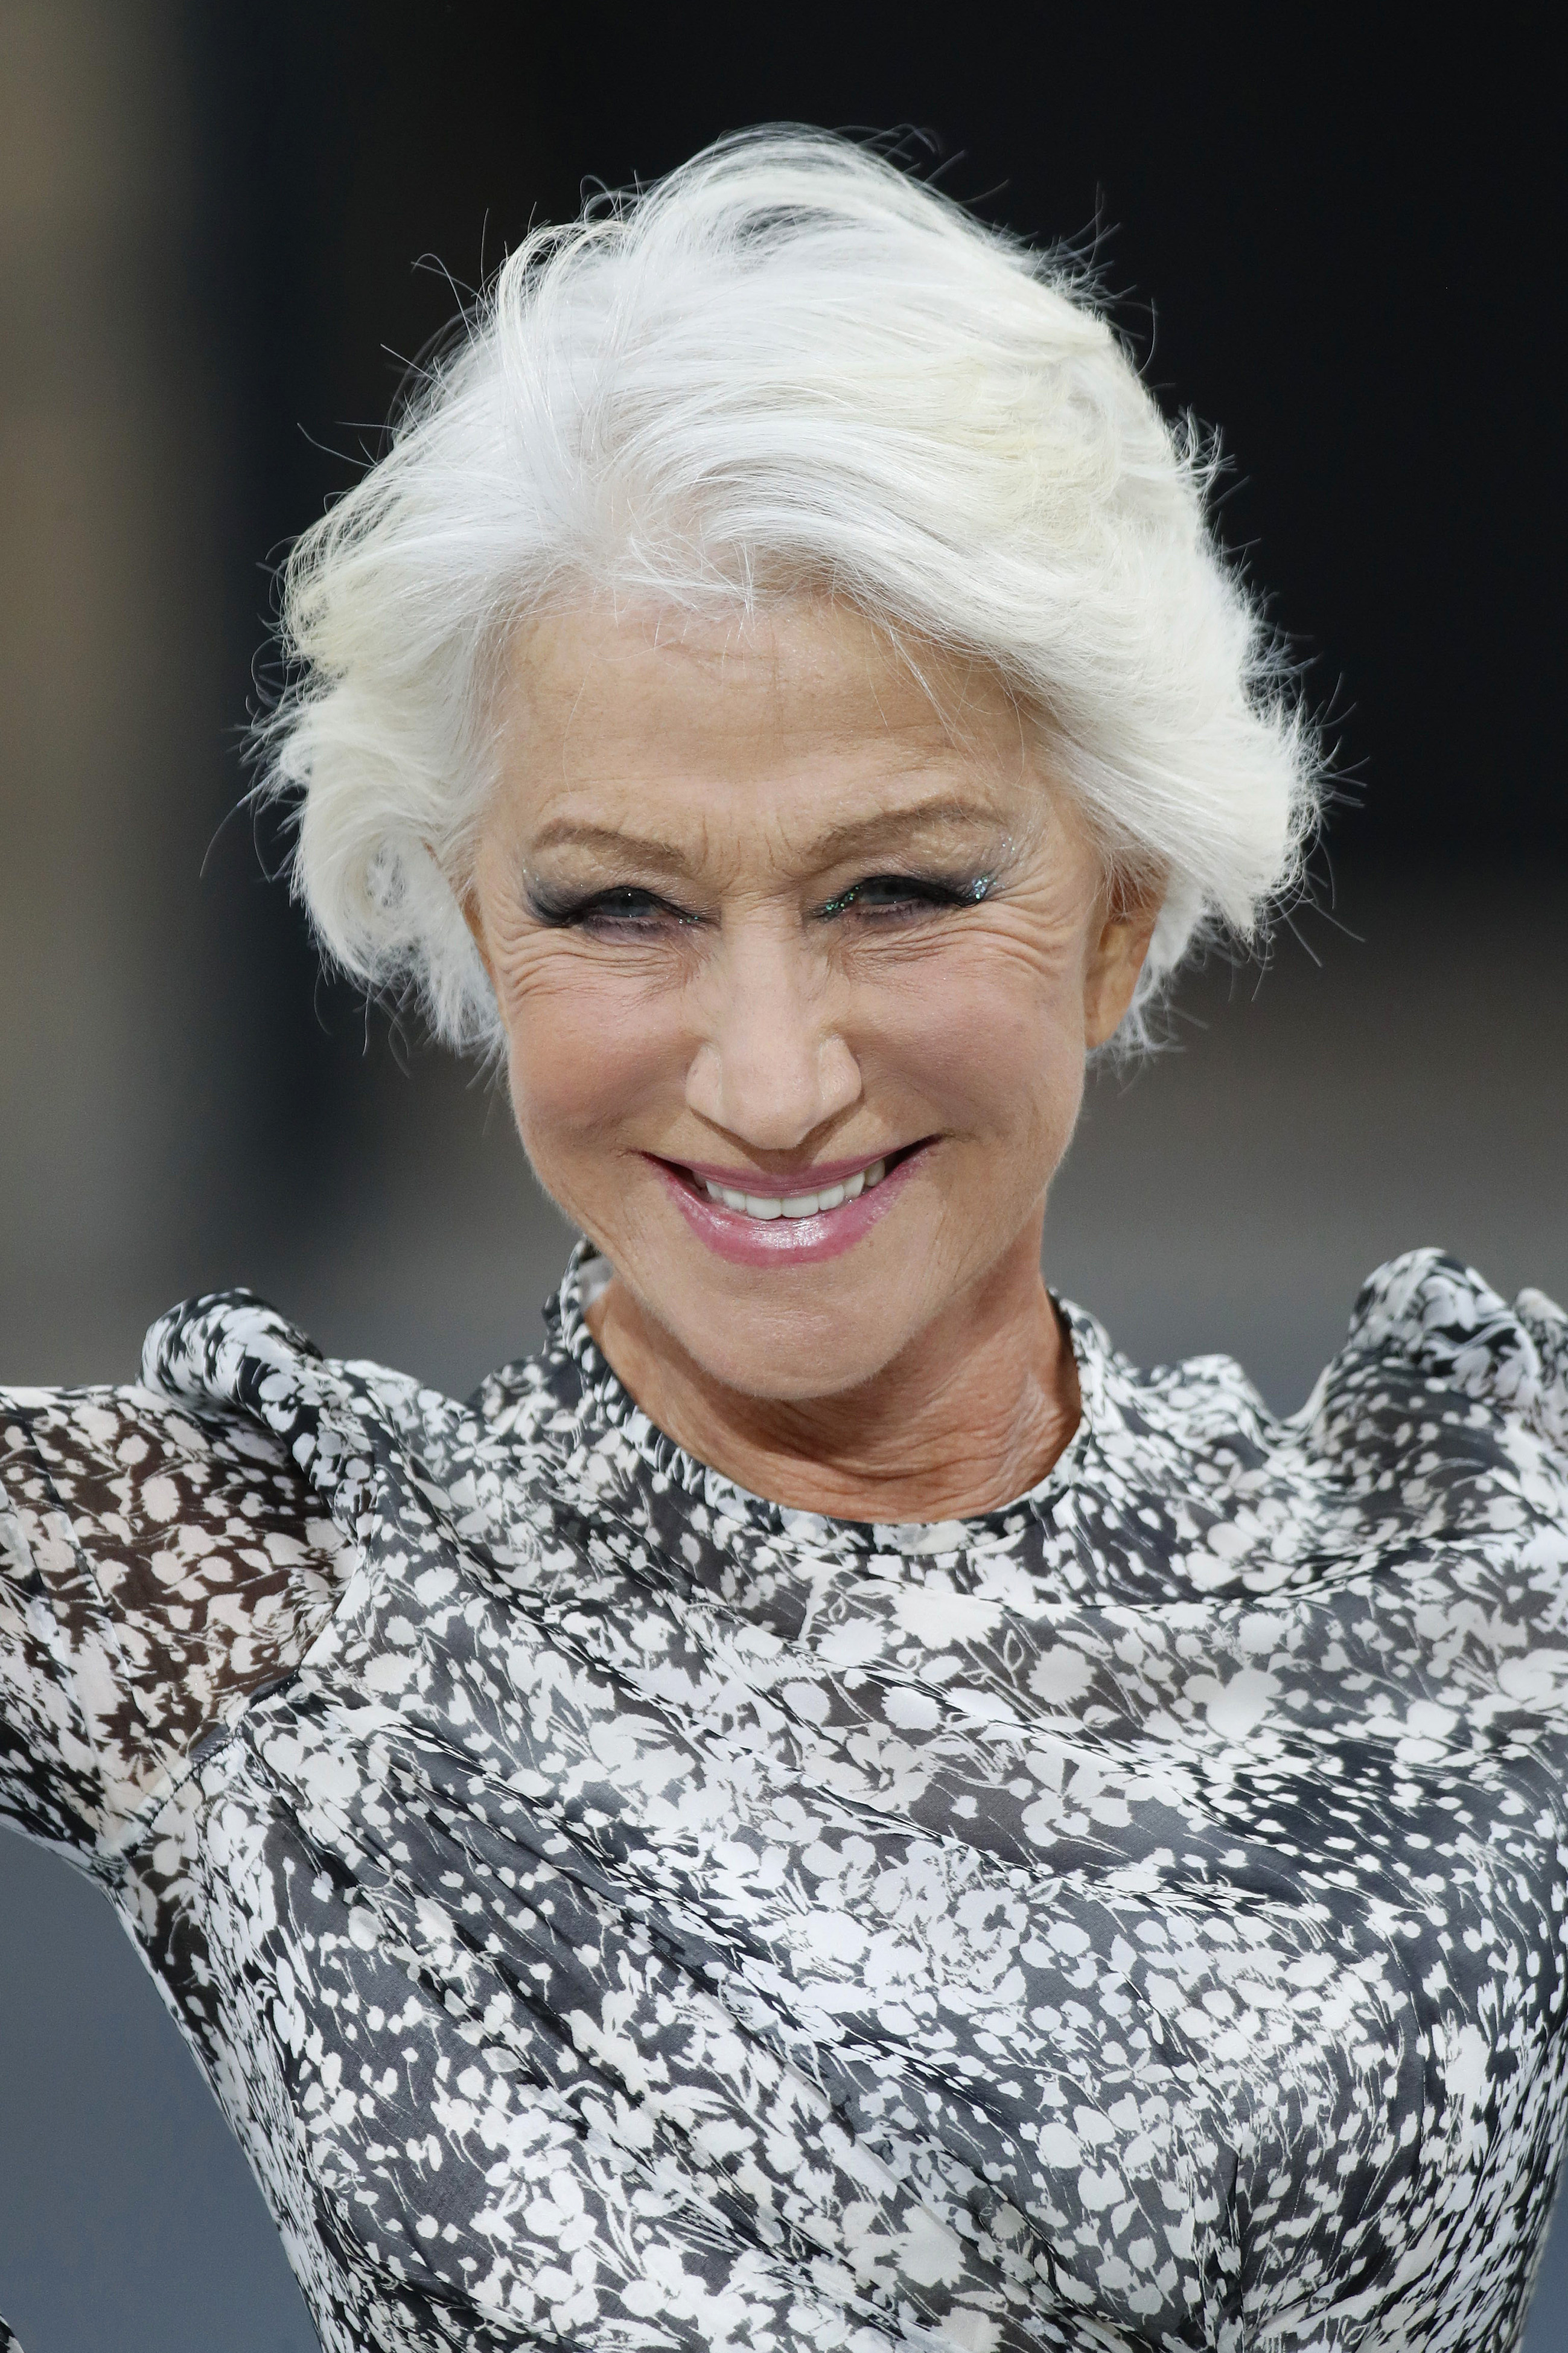 Helen Mirren during the "Le Defile L'Oreal Paris" Show as part of Paris Fashion Week on September 28, 2019 in Paris, France | Source: Getty Images